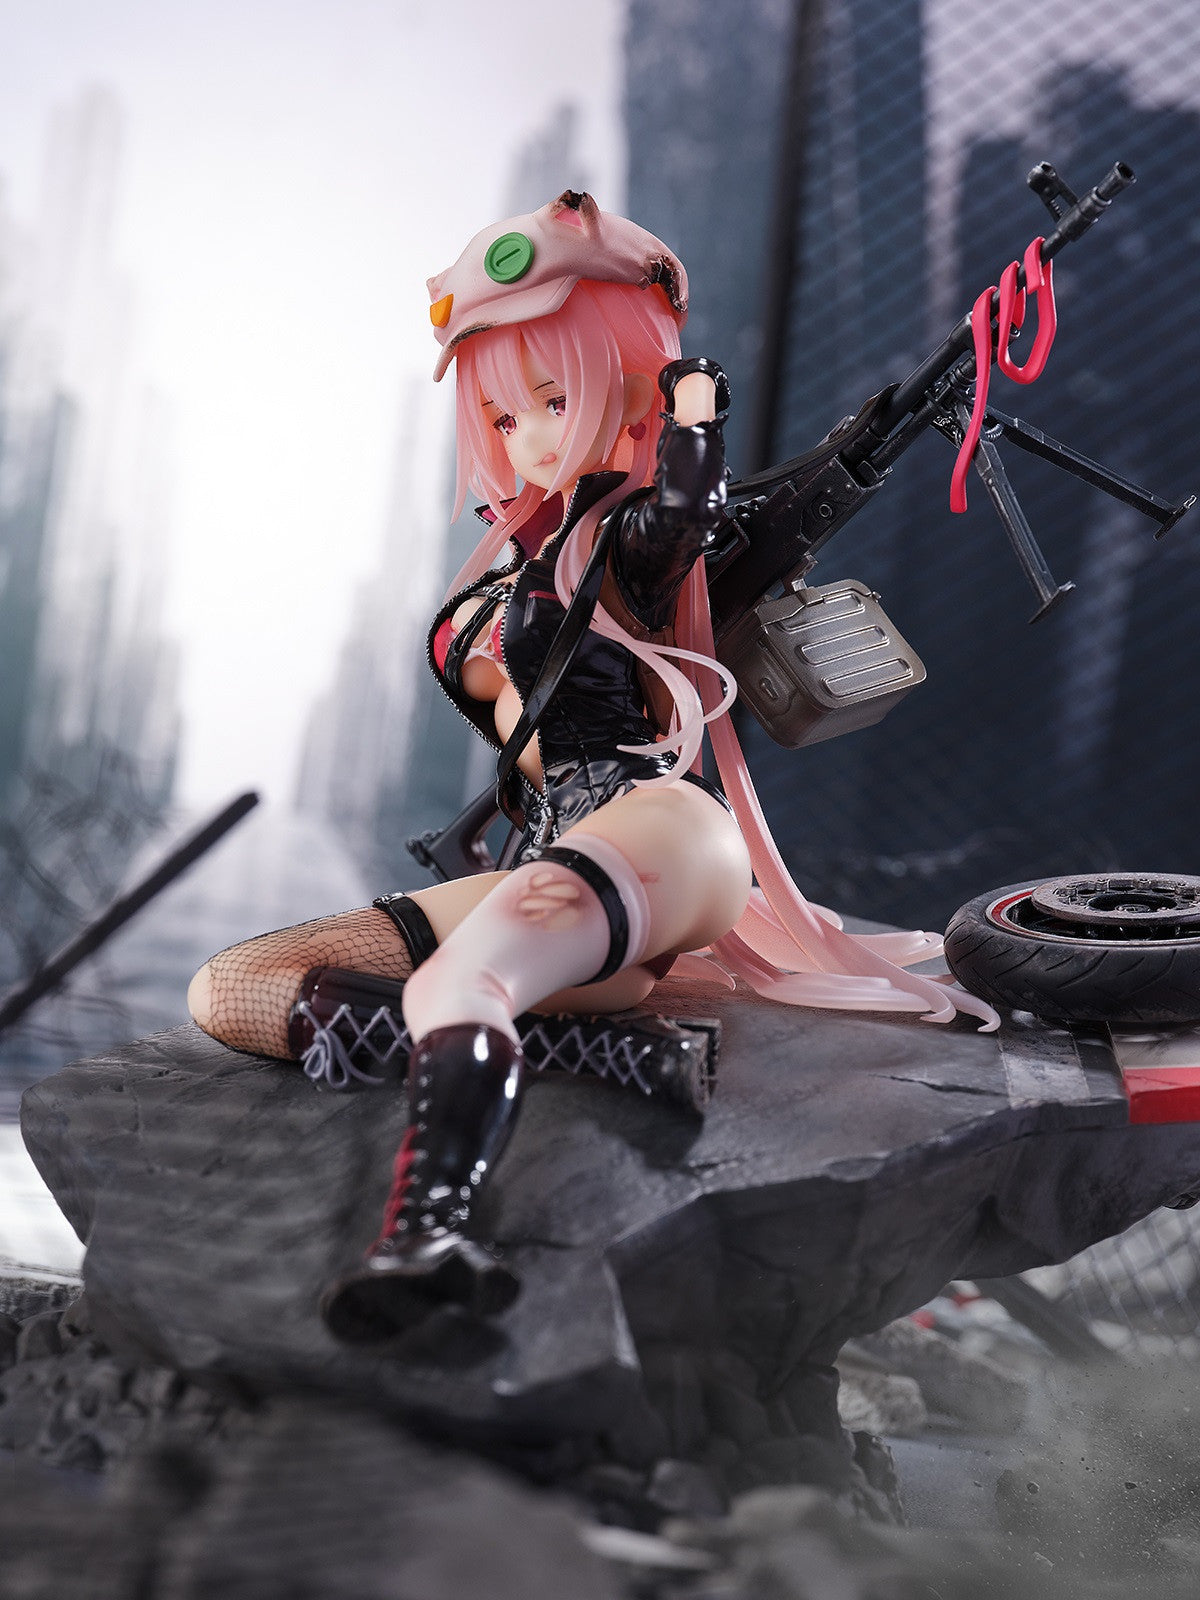 PRE ORDER Girls Frontline: 1/7 SCALE FIGURE - UKM-2000 with Lightning Speed (Heavy Damage Version)